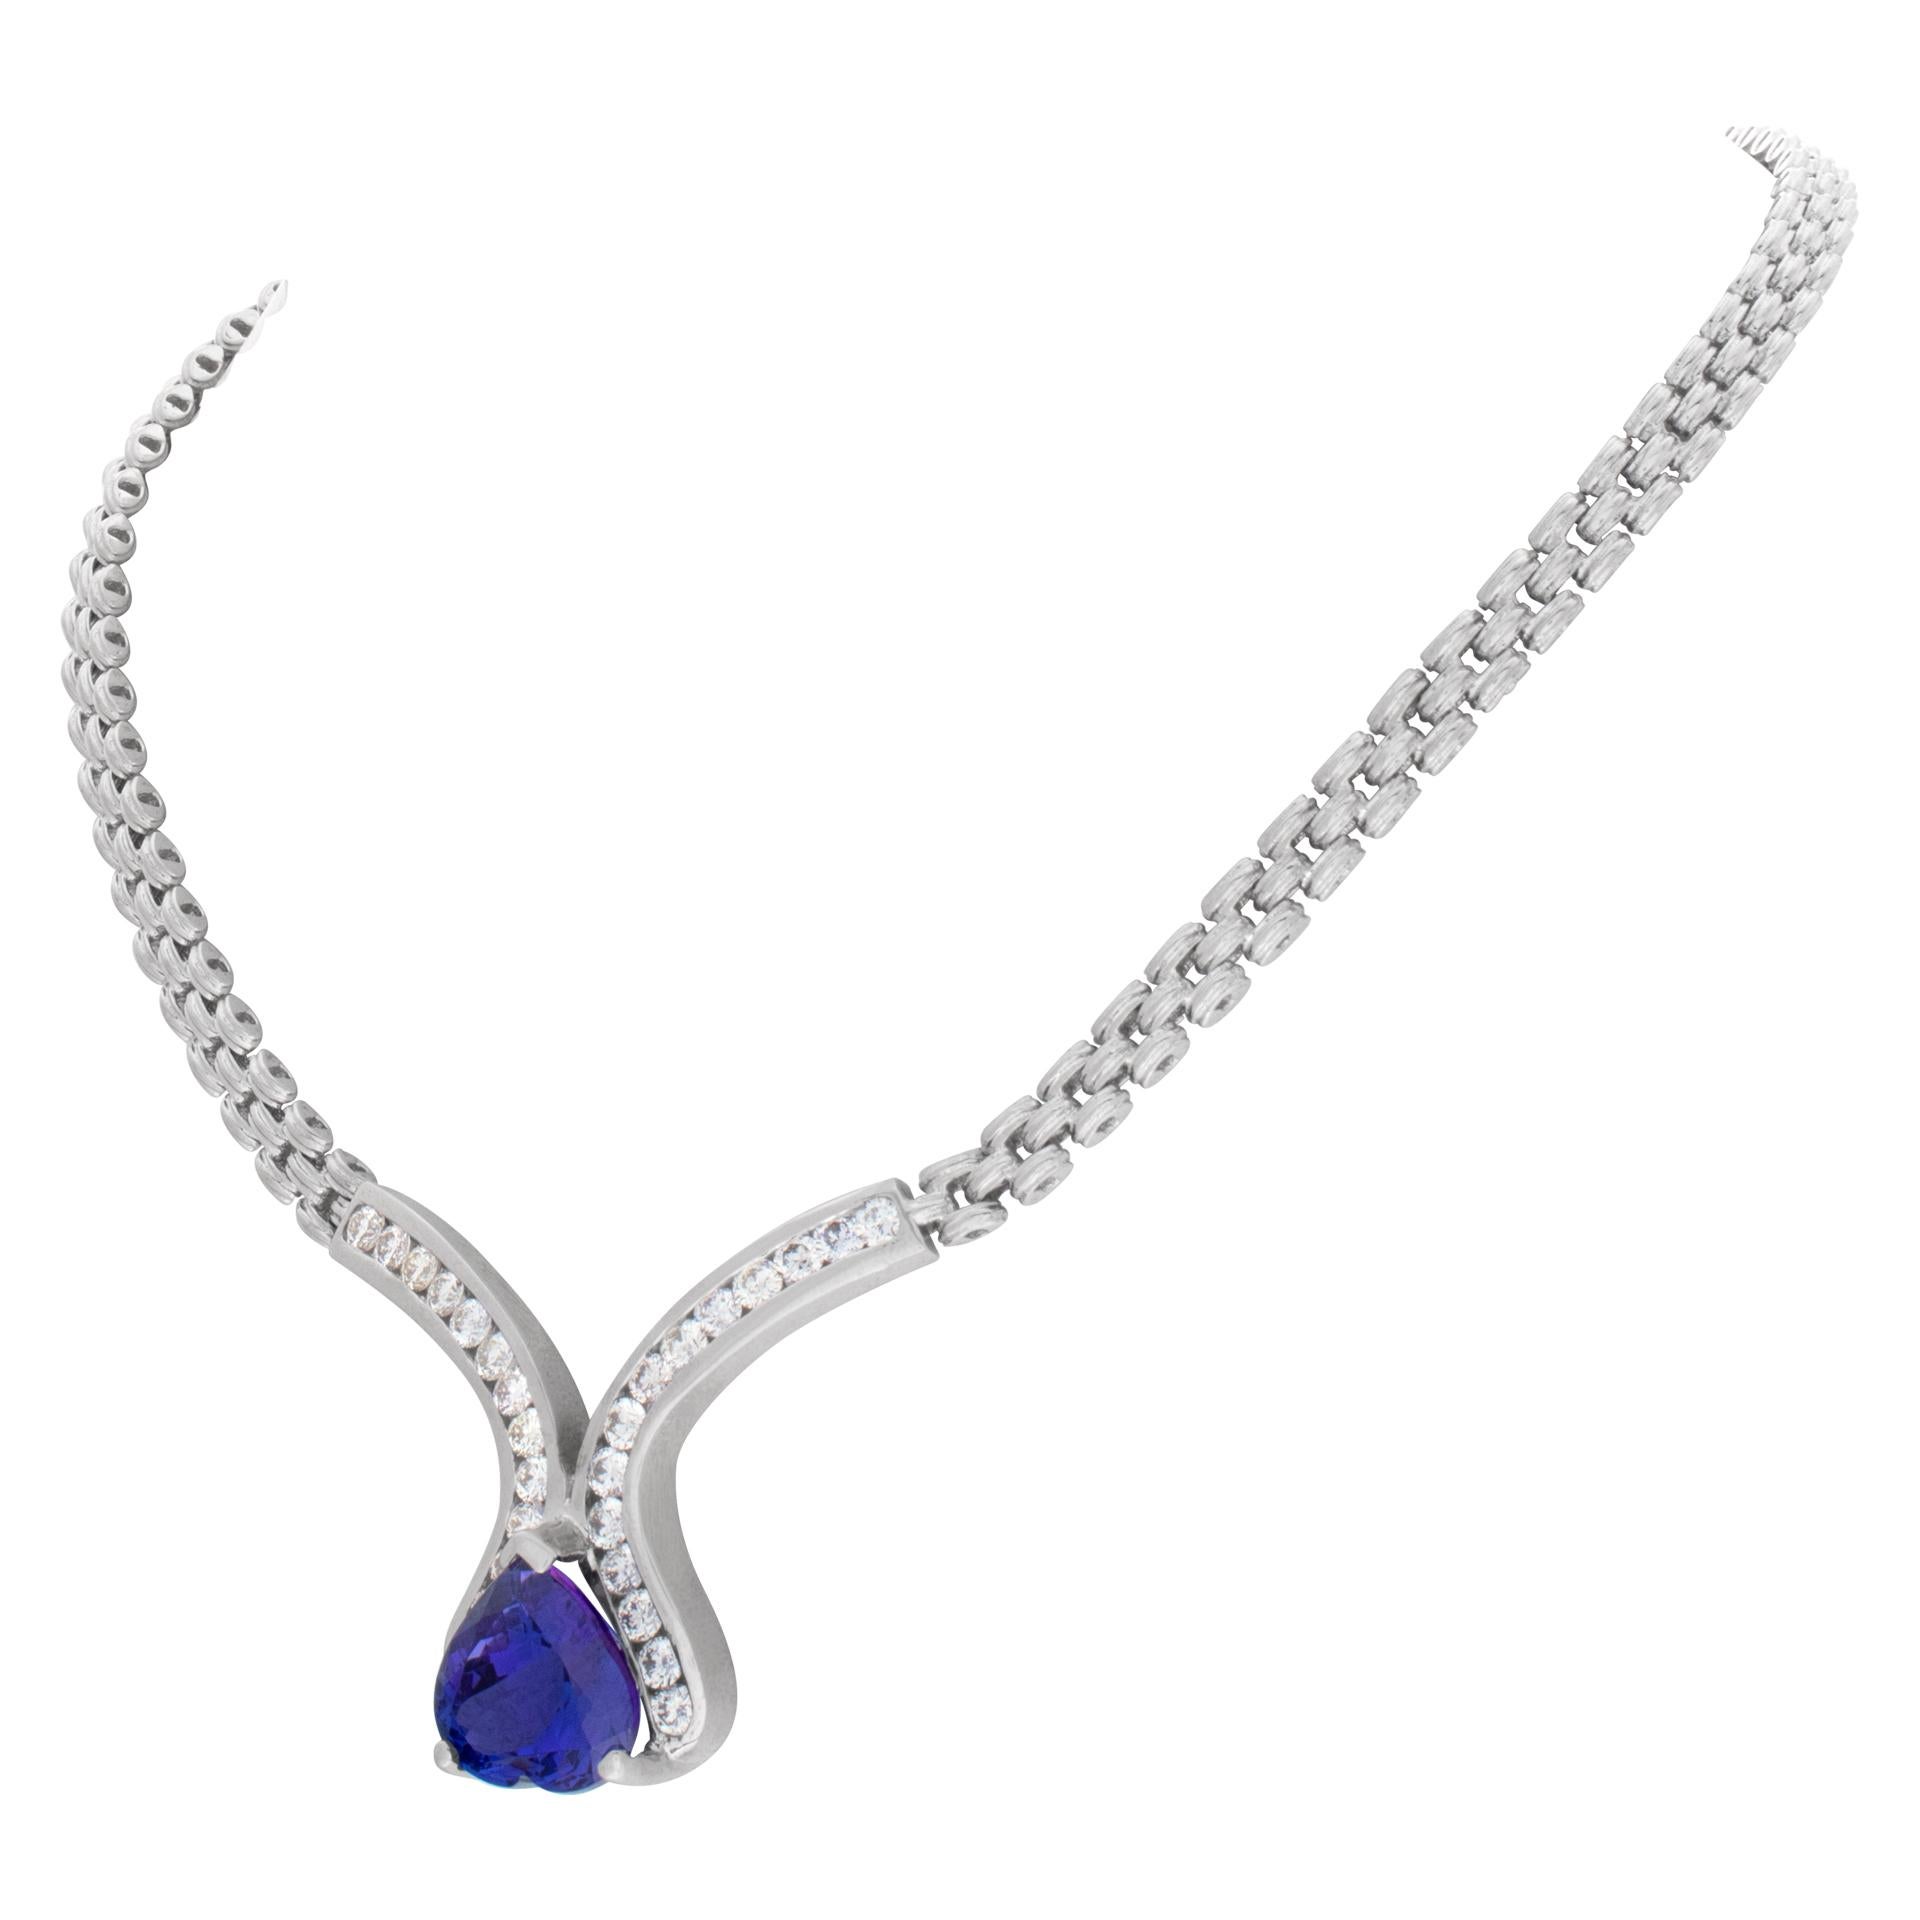 14k White Gold Necklace with a 13.15 Carat Heart Shape Tanzanite Surrounded In Excellent Condition For Sale In Surfside, FL